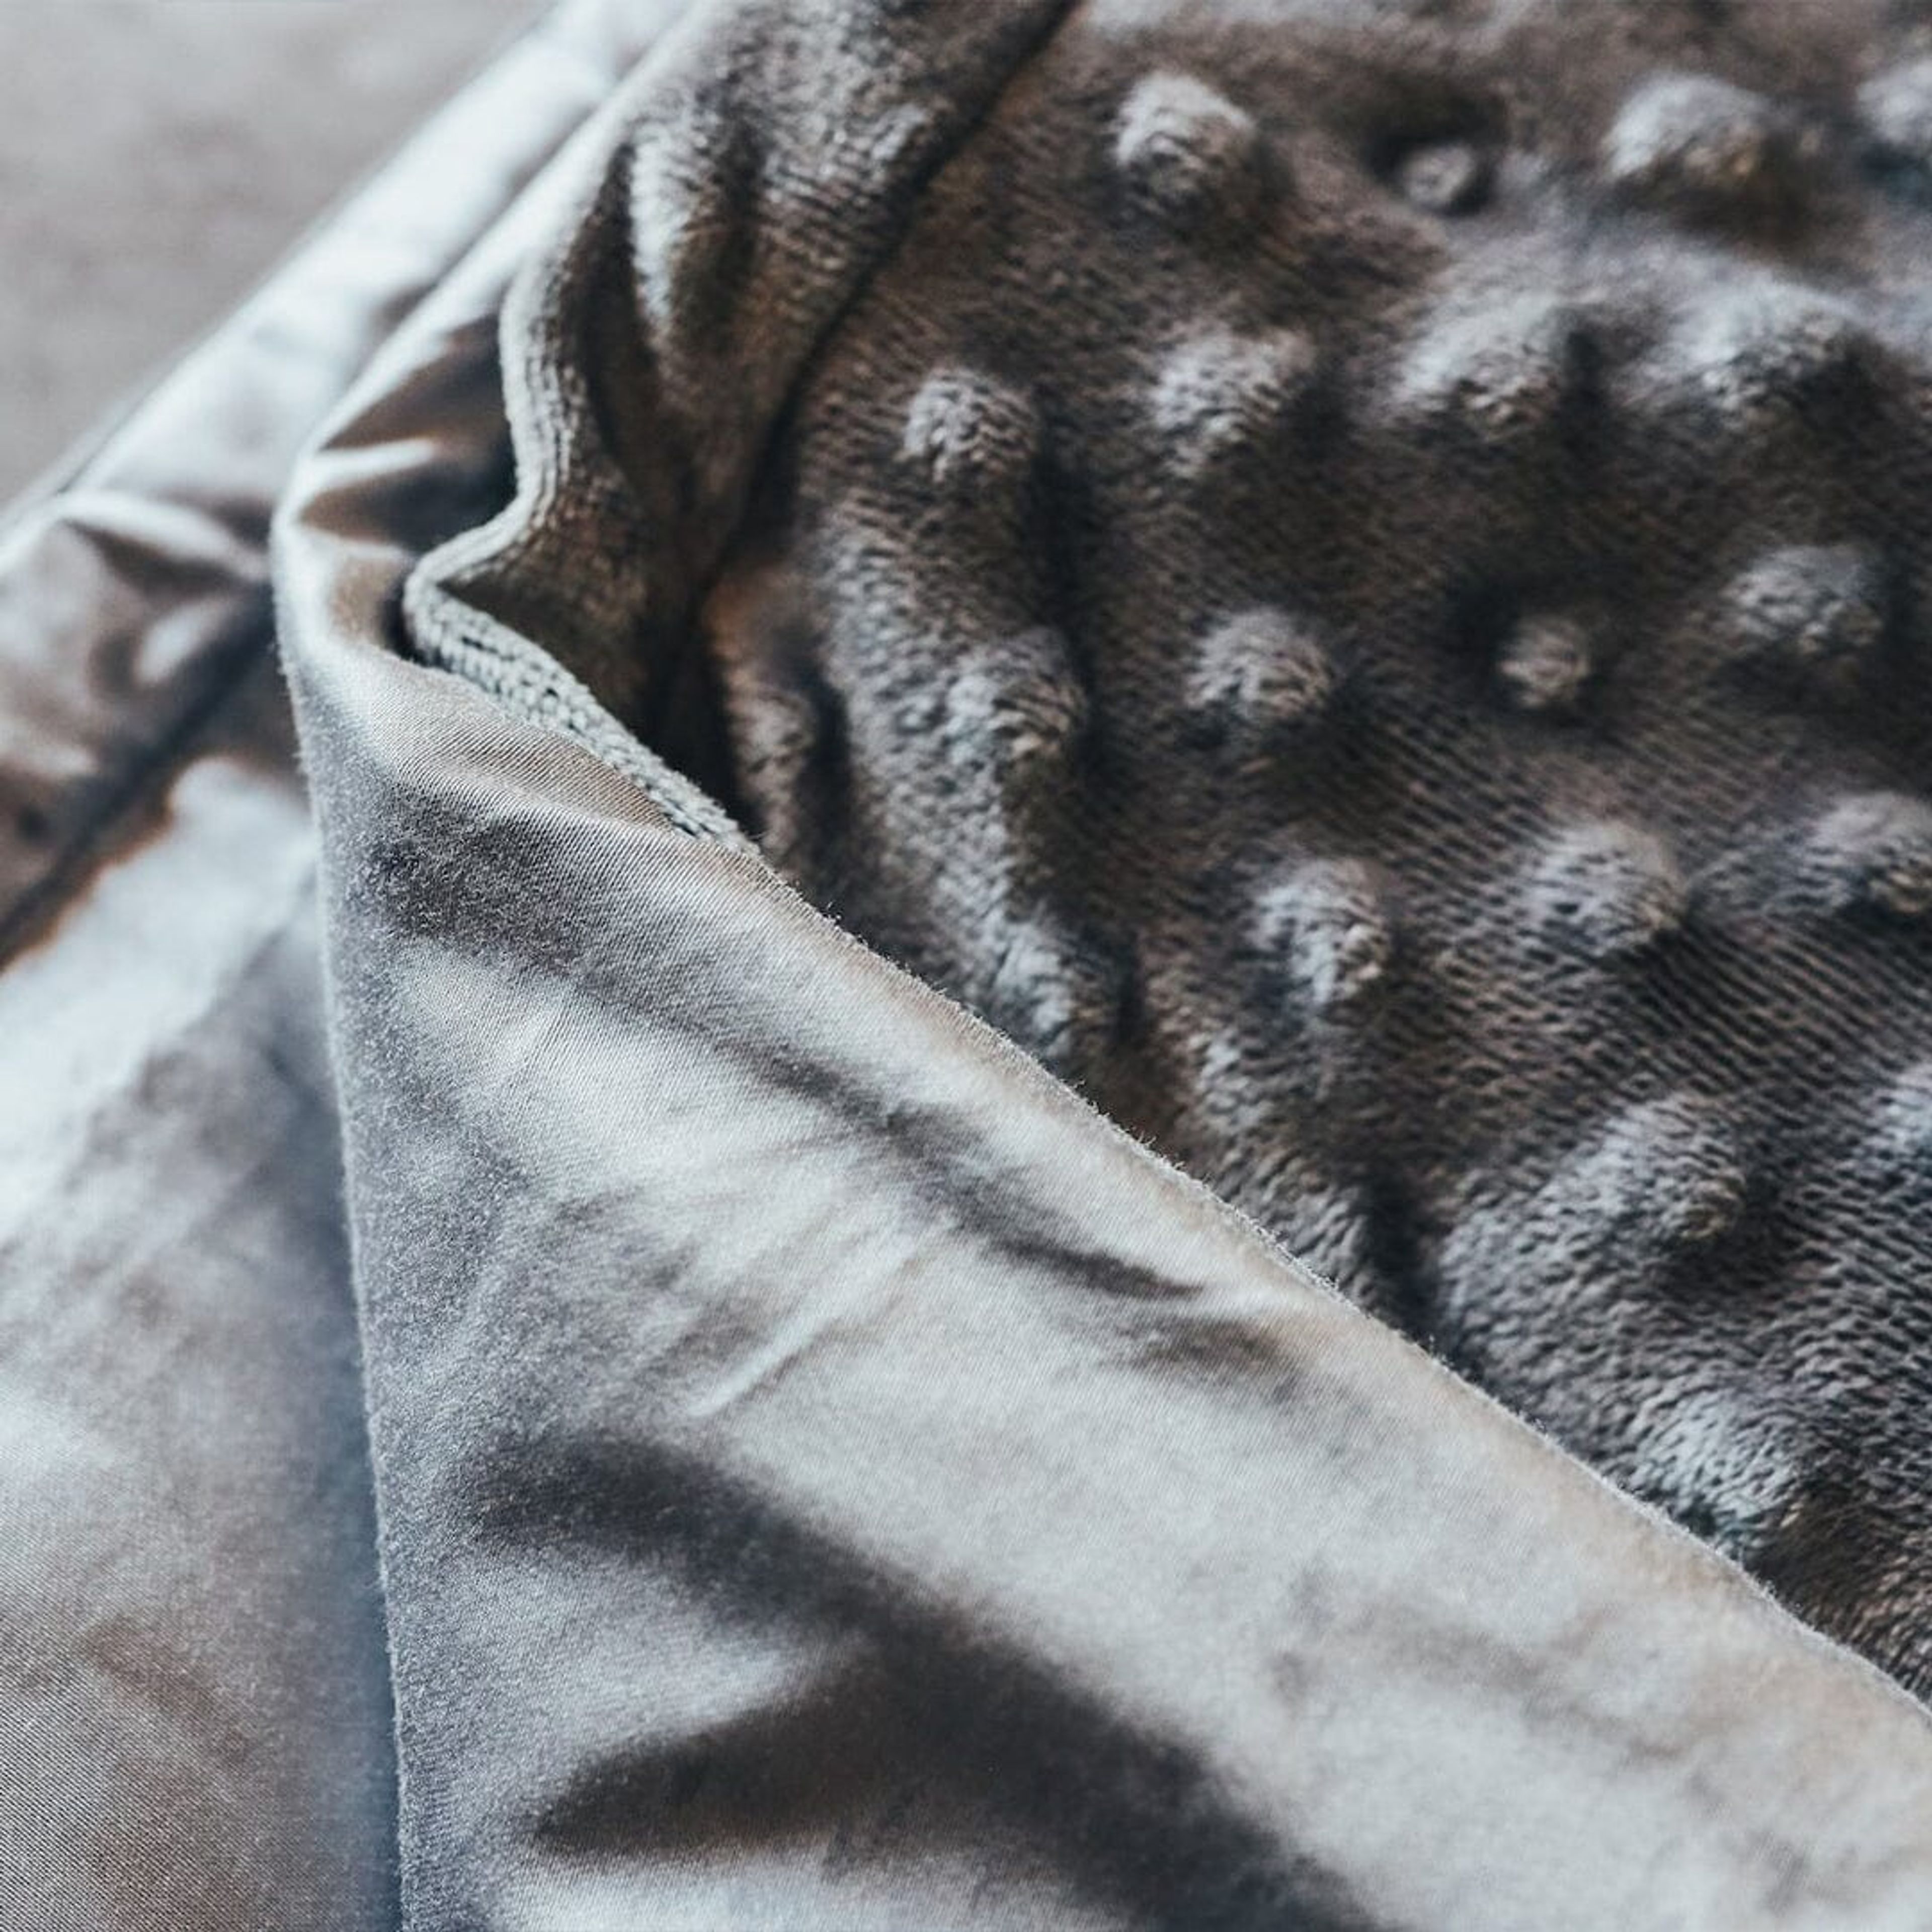 Reversible Weighted Blanket